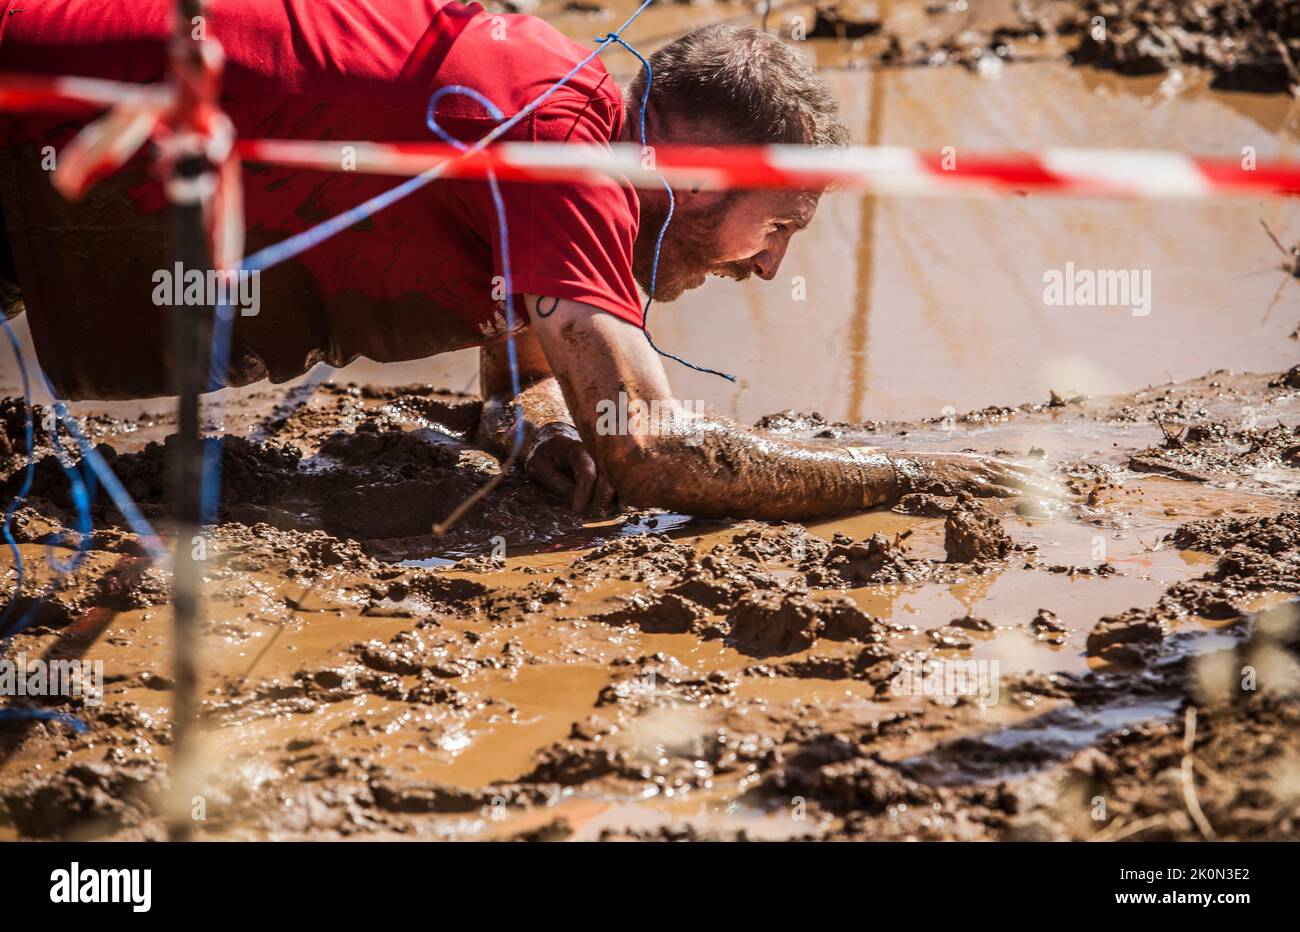 Merida, Spain - Sept 11th, 2022: FarinatoRace Merida 2022. Toughest obstacle course in the world. Crawling under wire Stock Photo